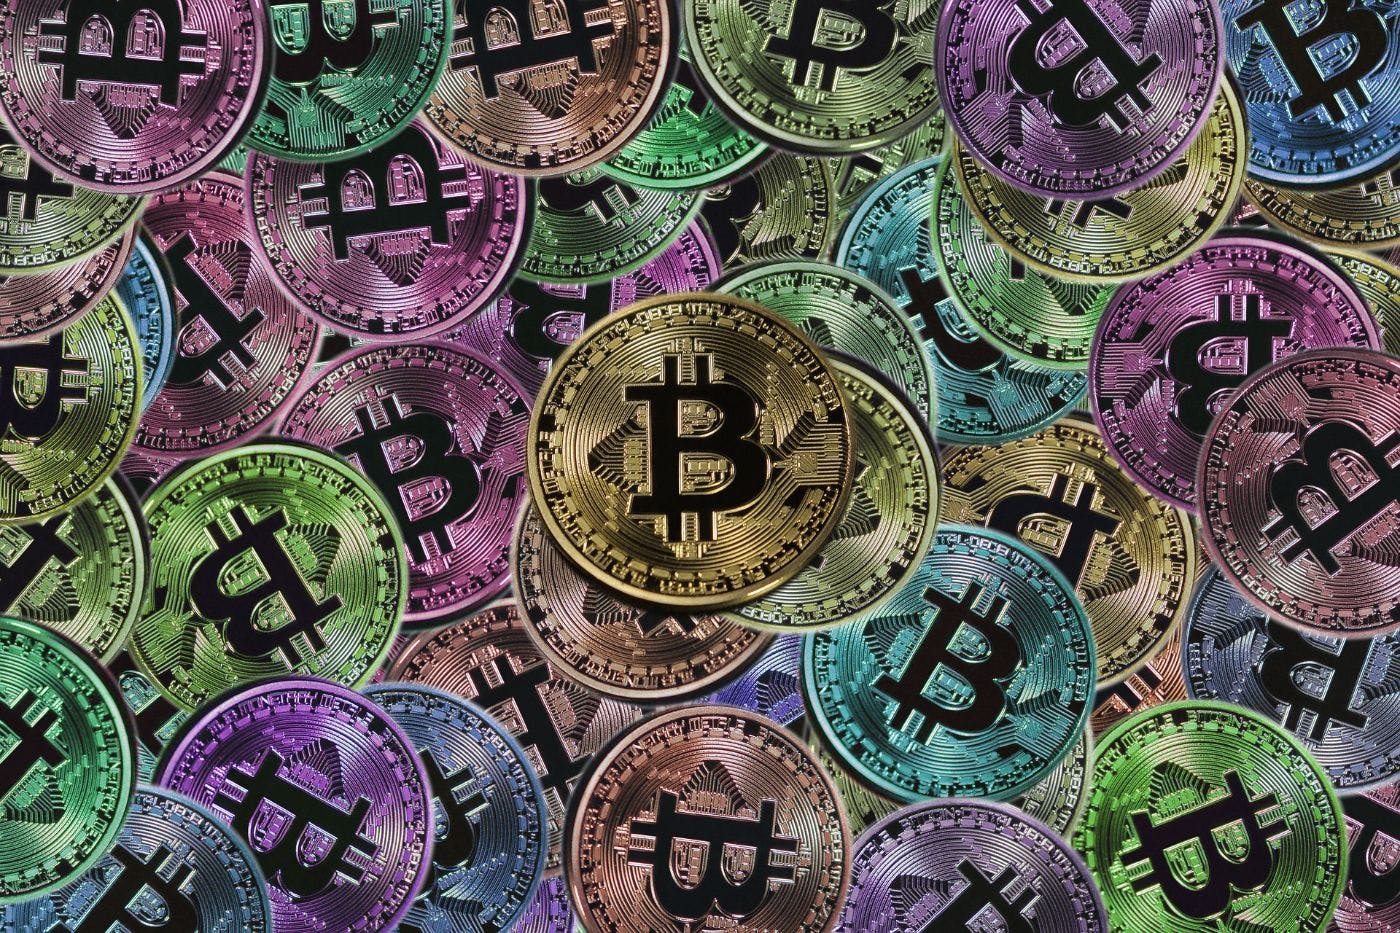 featured image - Bitcoin: Stop Speculating and Start Innovating - The Shift of Currency to Assets